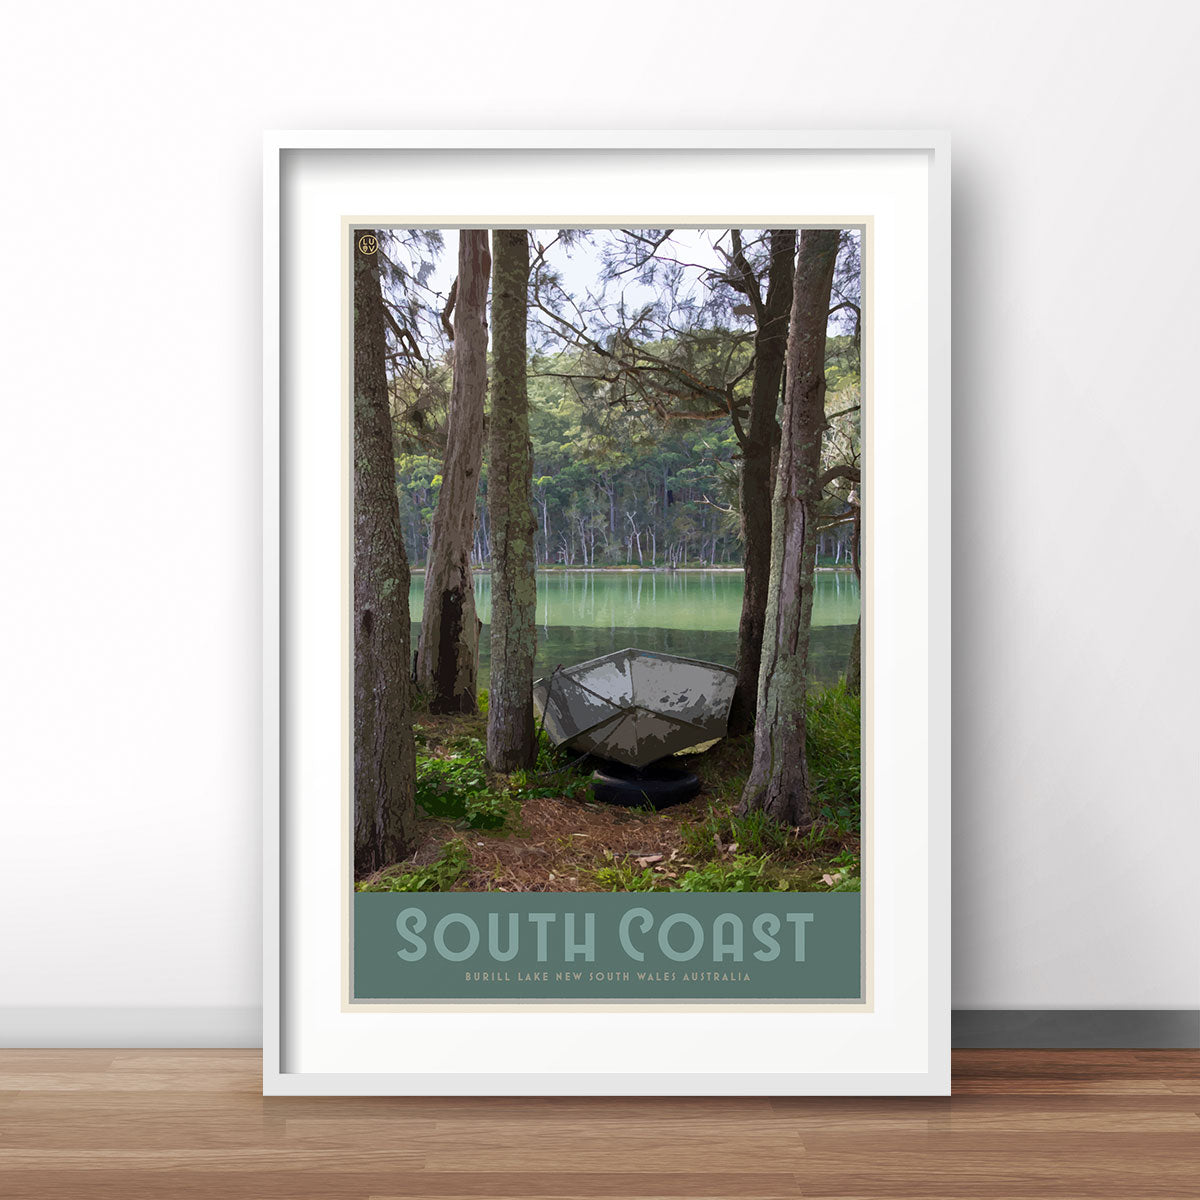 South Coast print, vintage travel style designed by Places We Luv